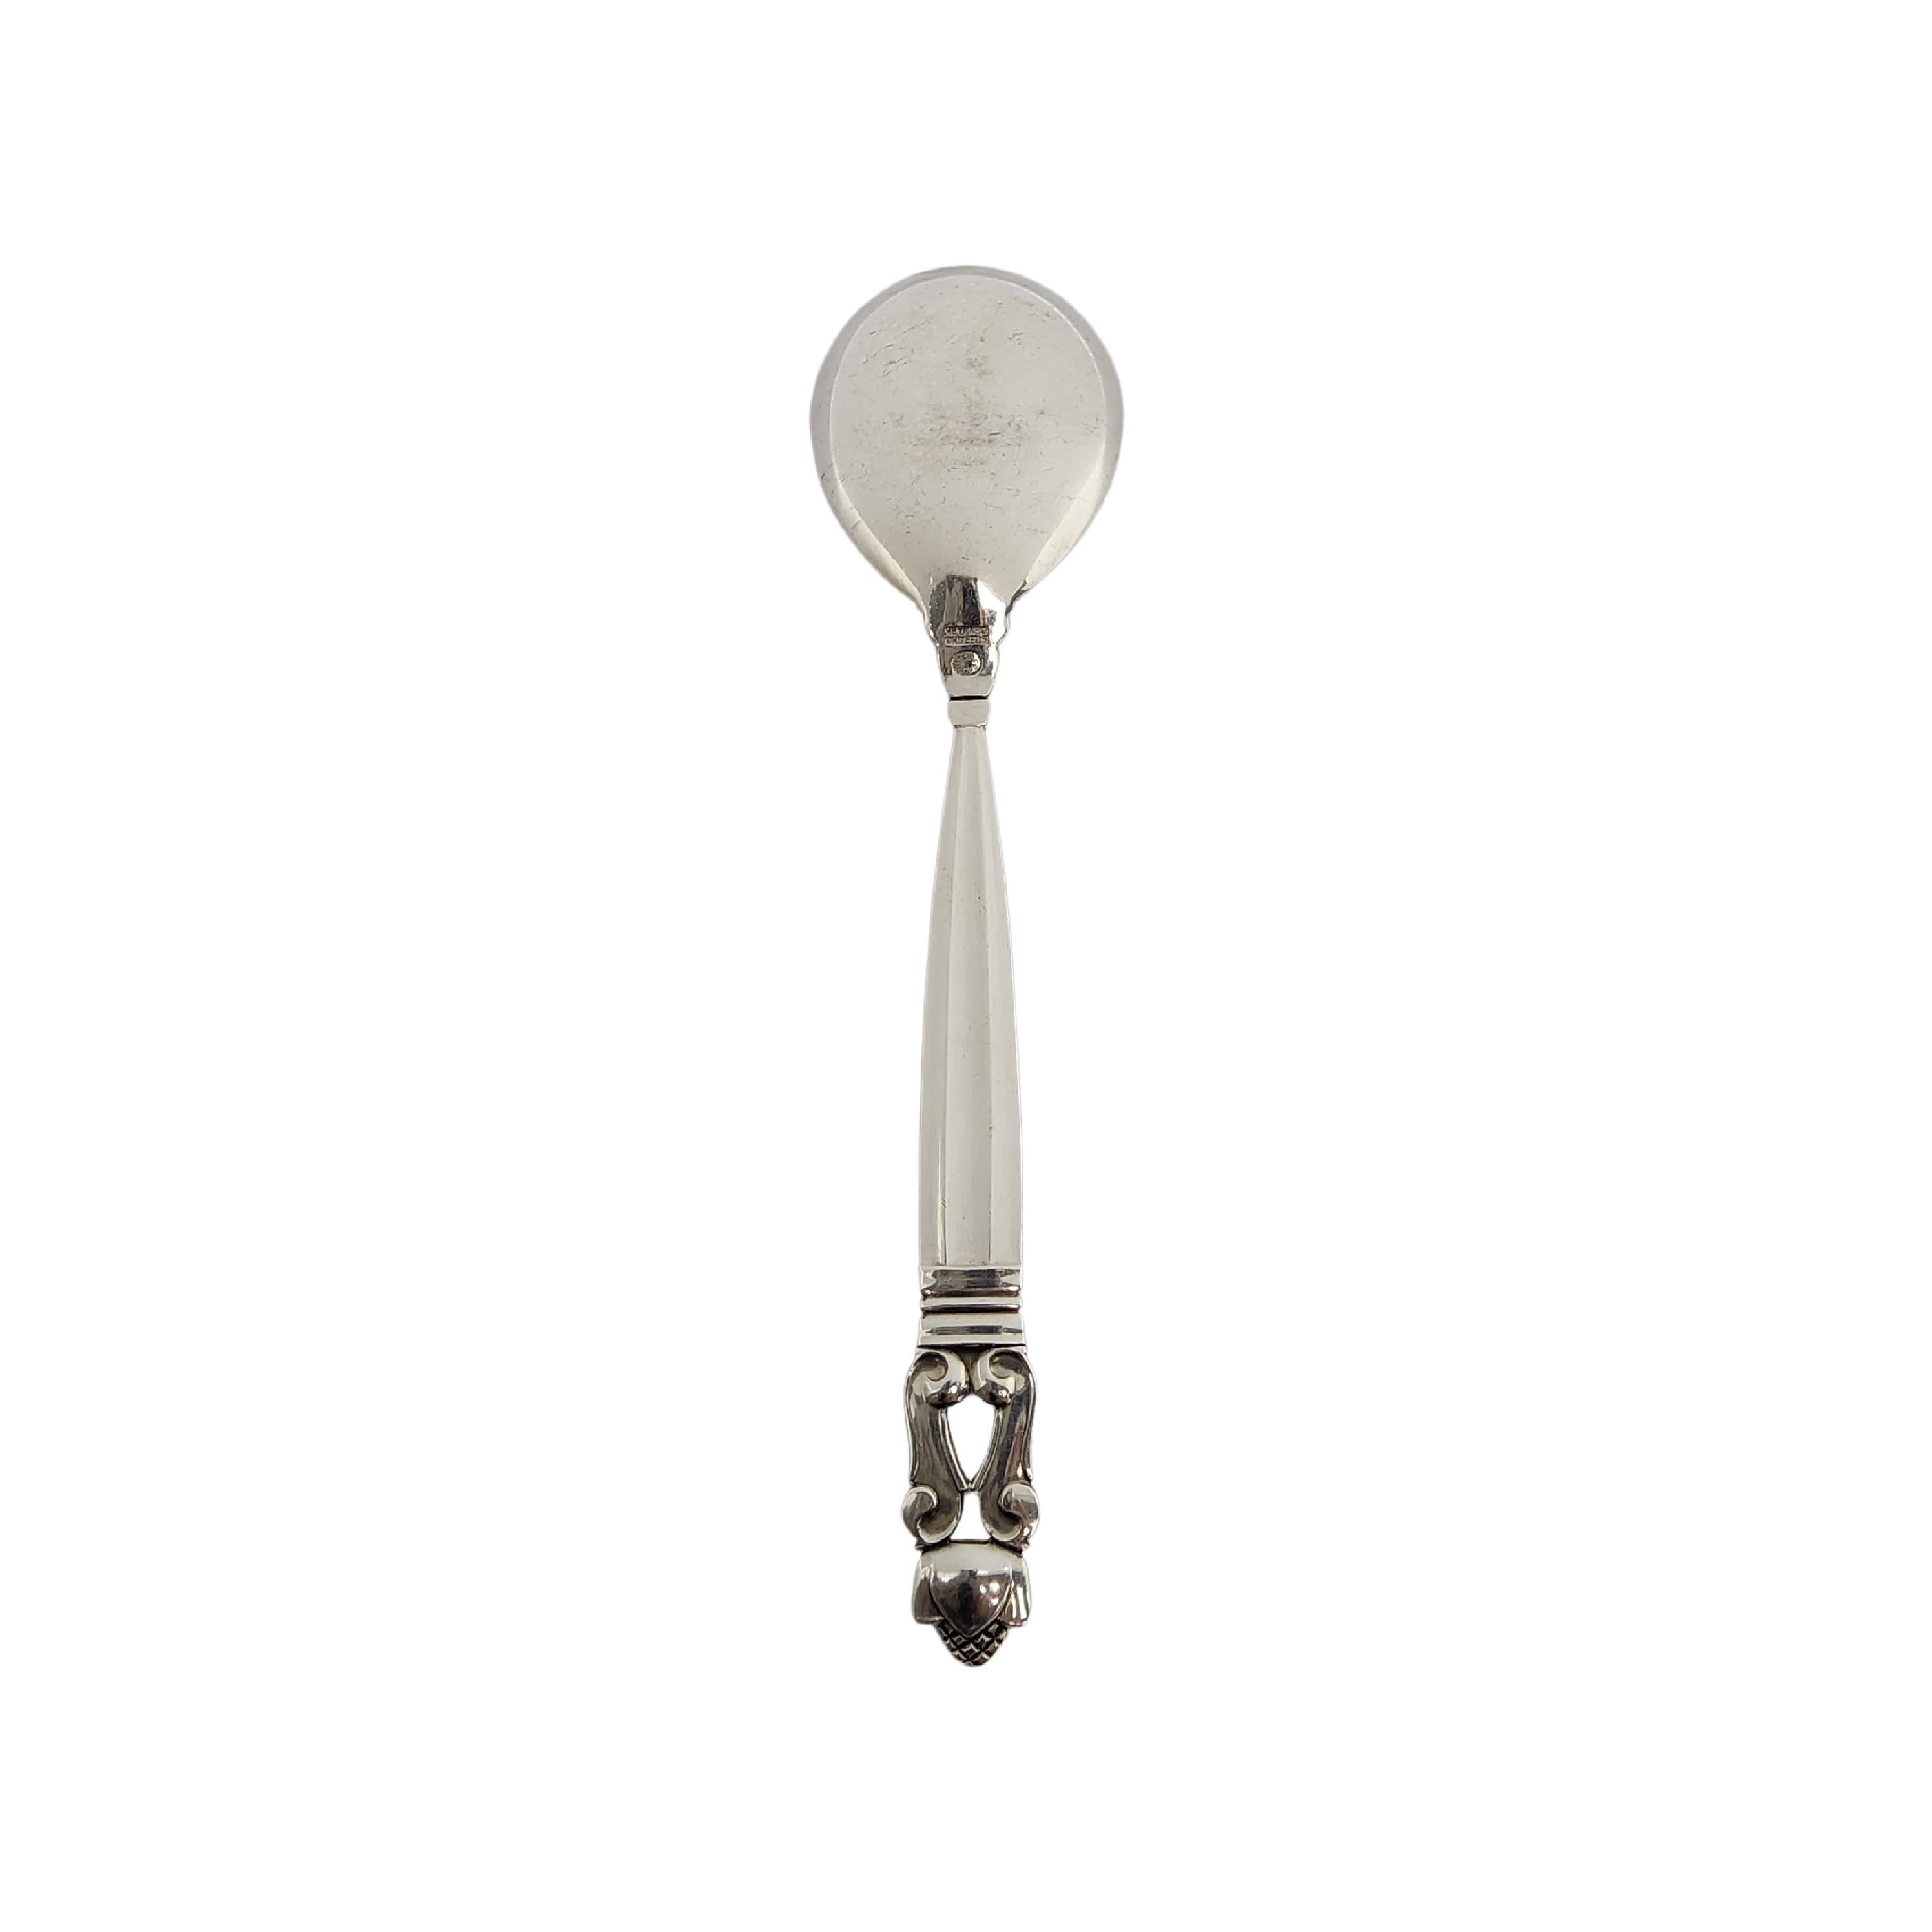 Sterling silver jam spoon by Georg Jensen Denmark in the Acorn pattern.

The Acorn pattern was introduced in 1915 as a collaboration between Georg Jensen and designer Johan Ronde. The pattern combines Art Nouveau and Art Deco styles, and has become